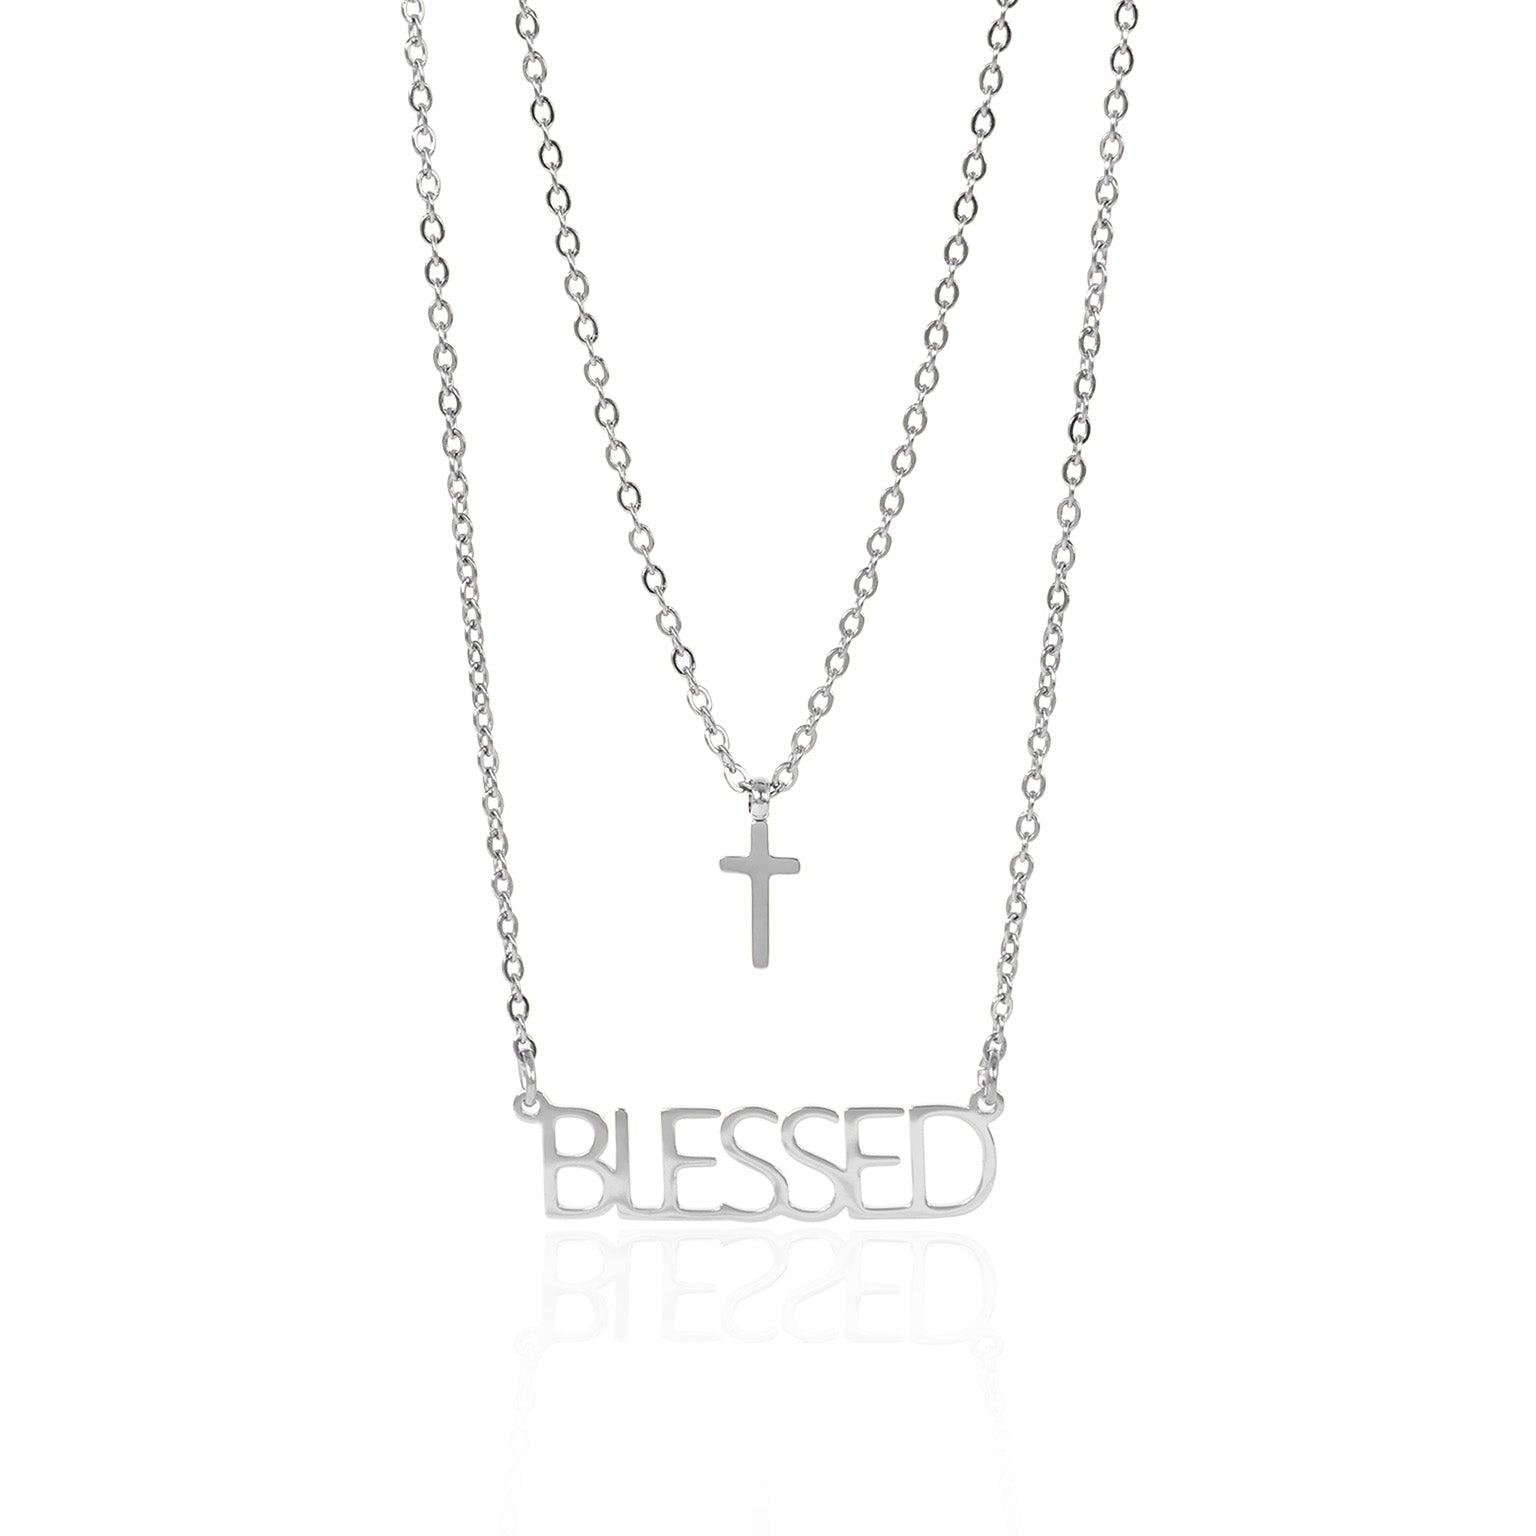 Stainless Steel PVD Coated "Blessed" Layered Cross Charm Necklace / SBB0323